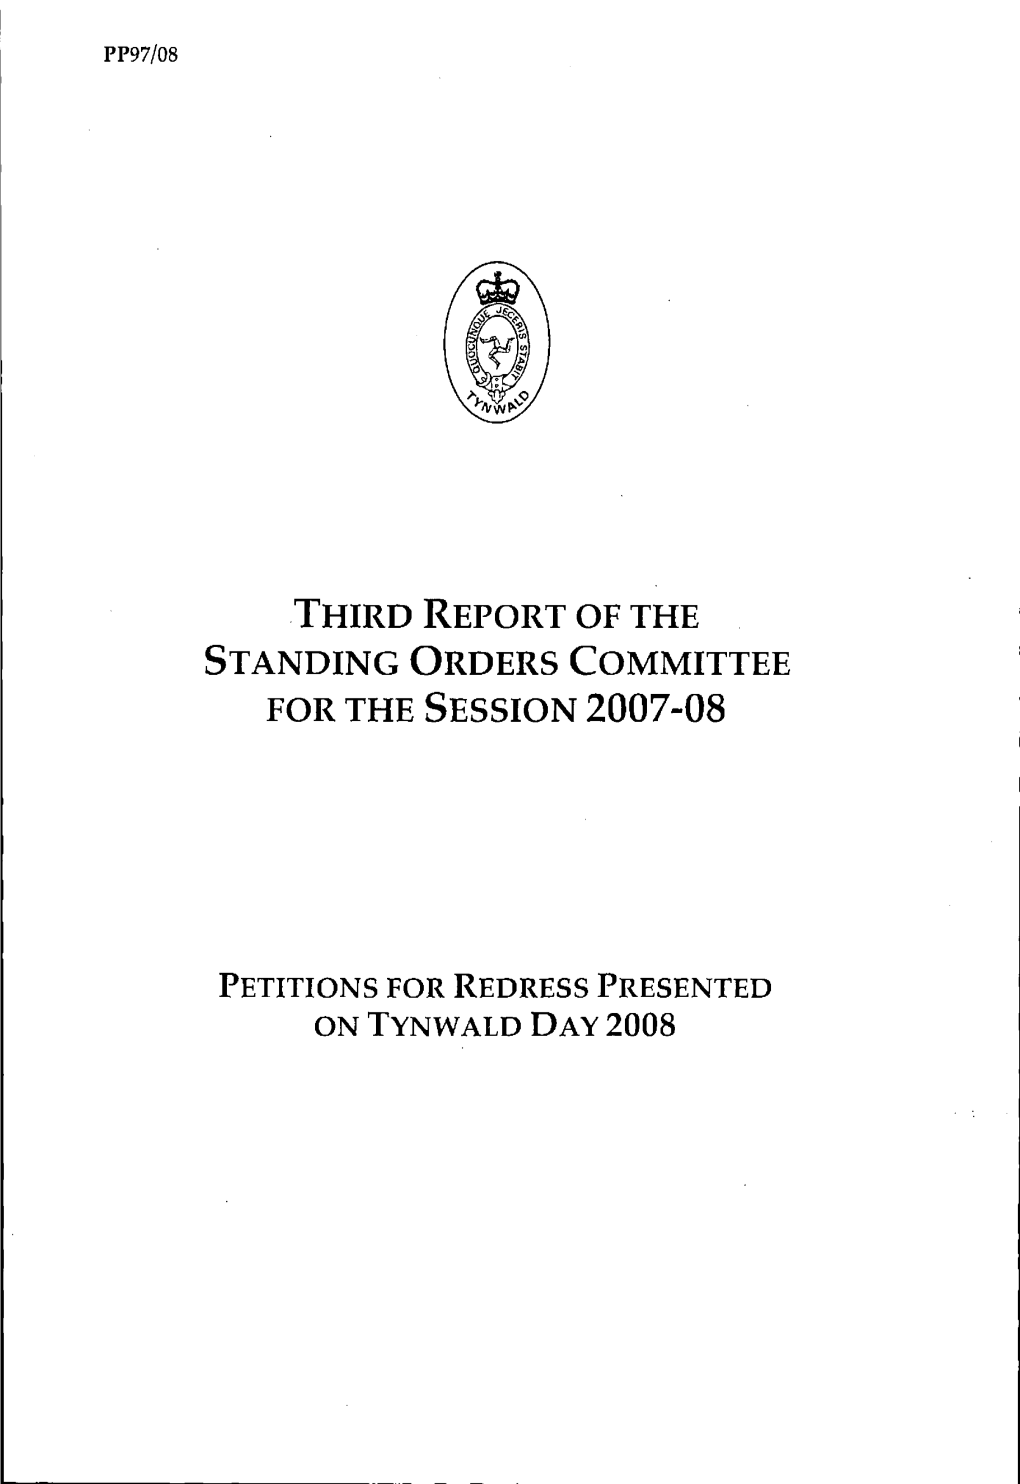 Petitions for Redress July 2008